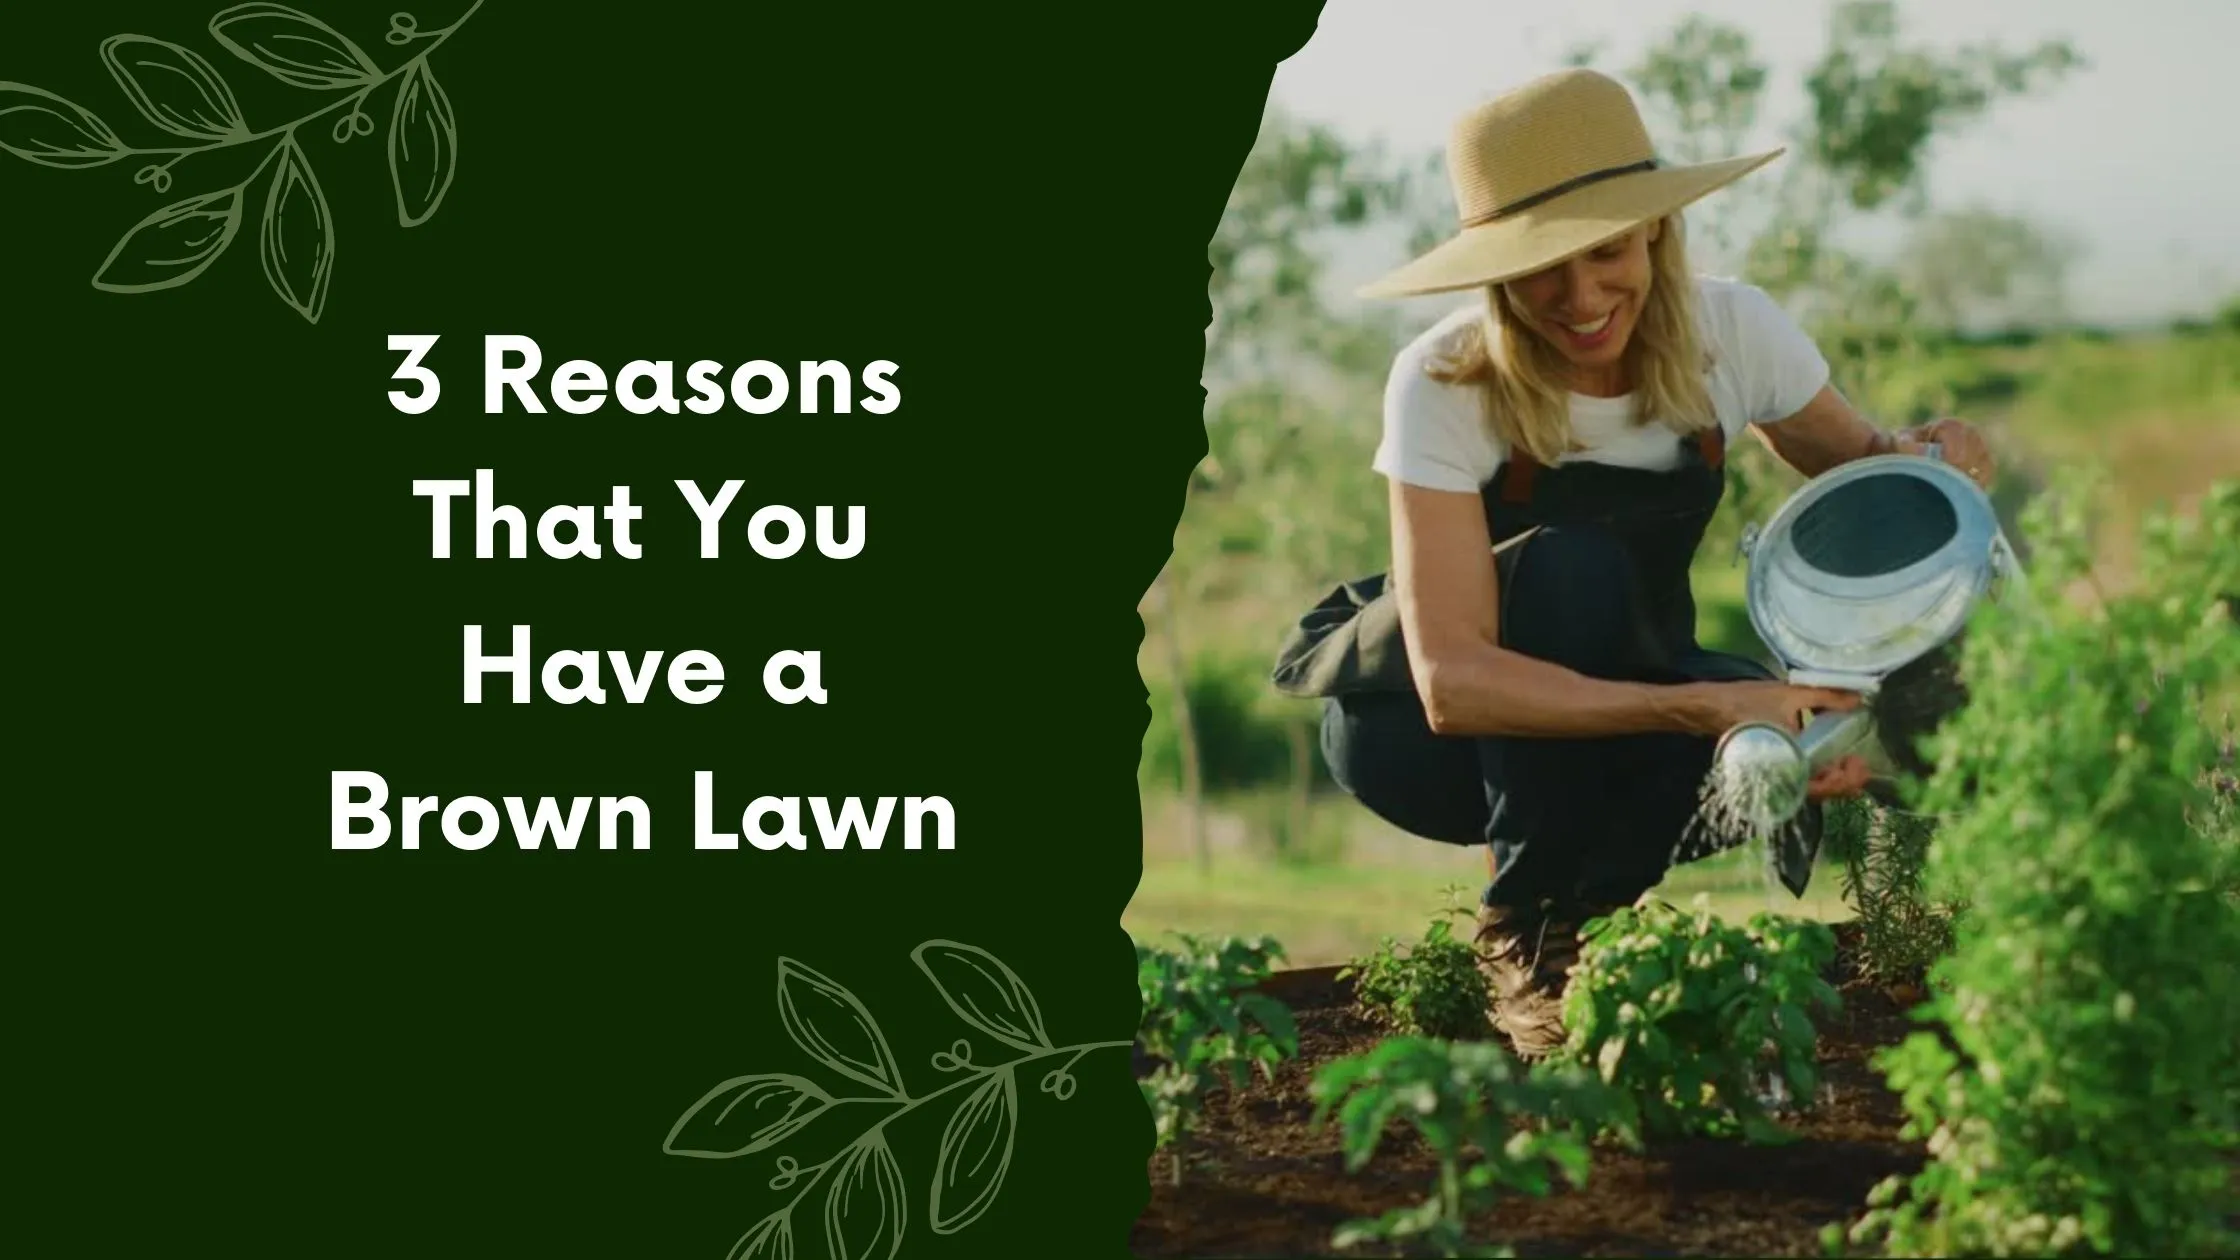 3 Reasons That You Have a Brown Lawn